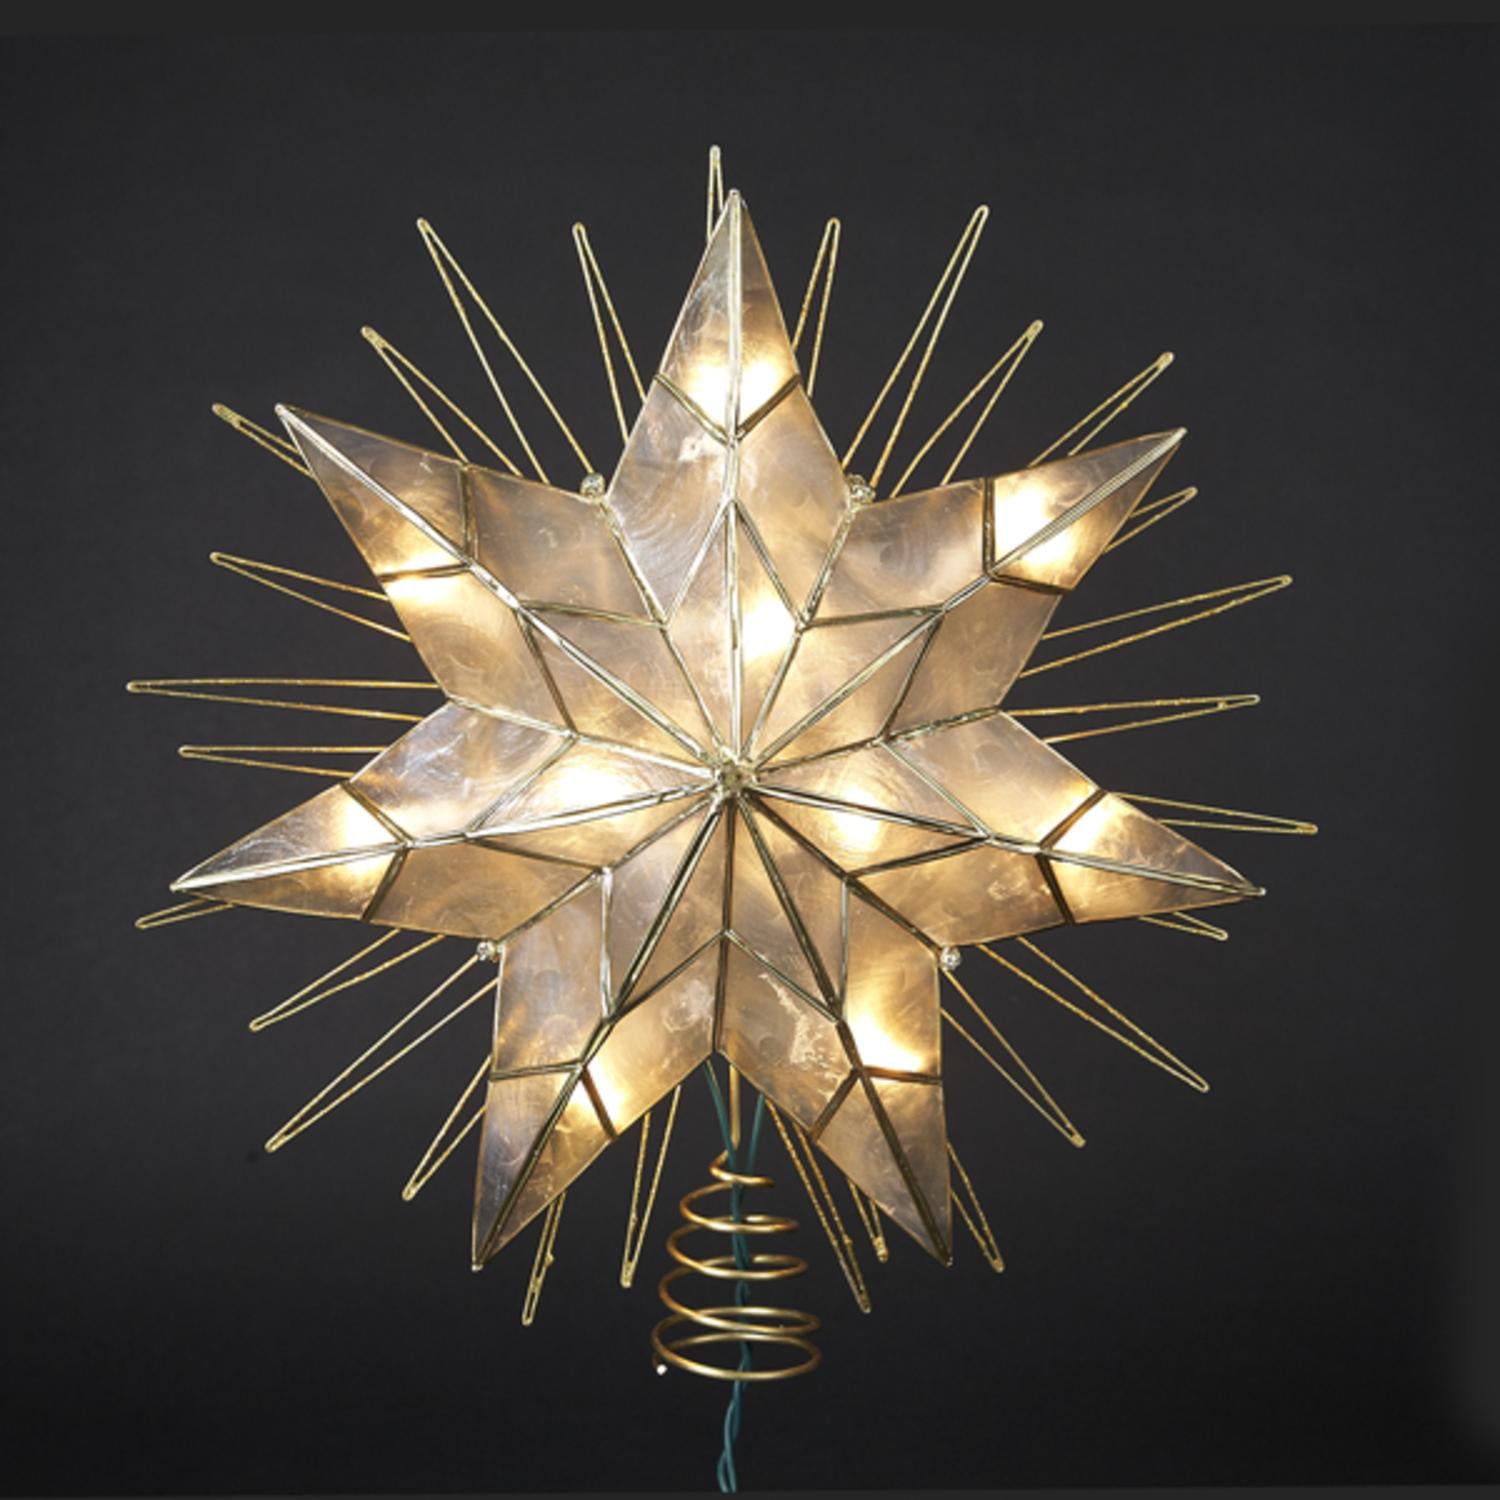 10.5" Lighted LED 8-Point Star Christmas Tree Topper - Pure White Lights - Walmart.com